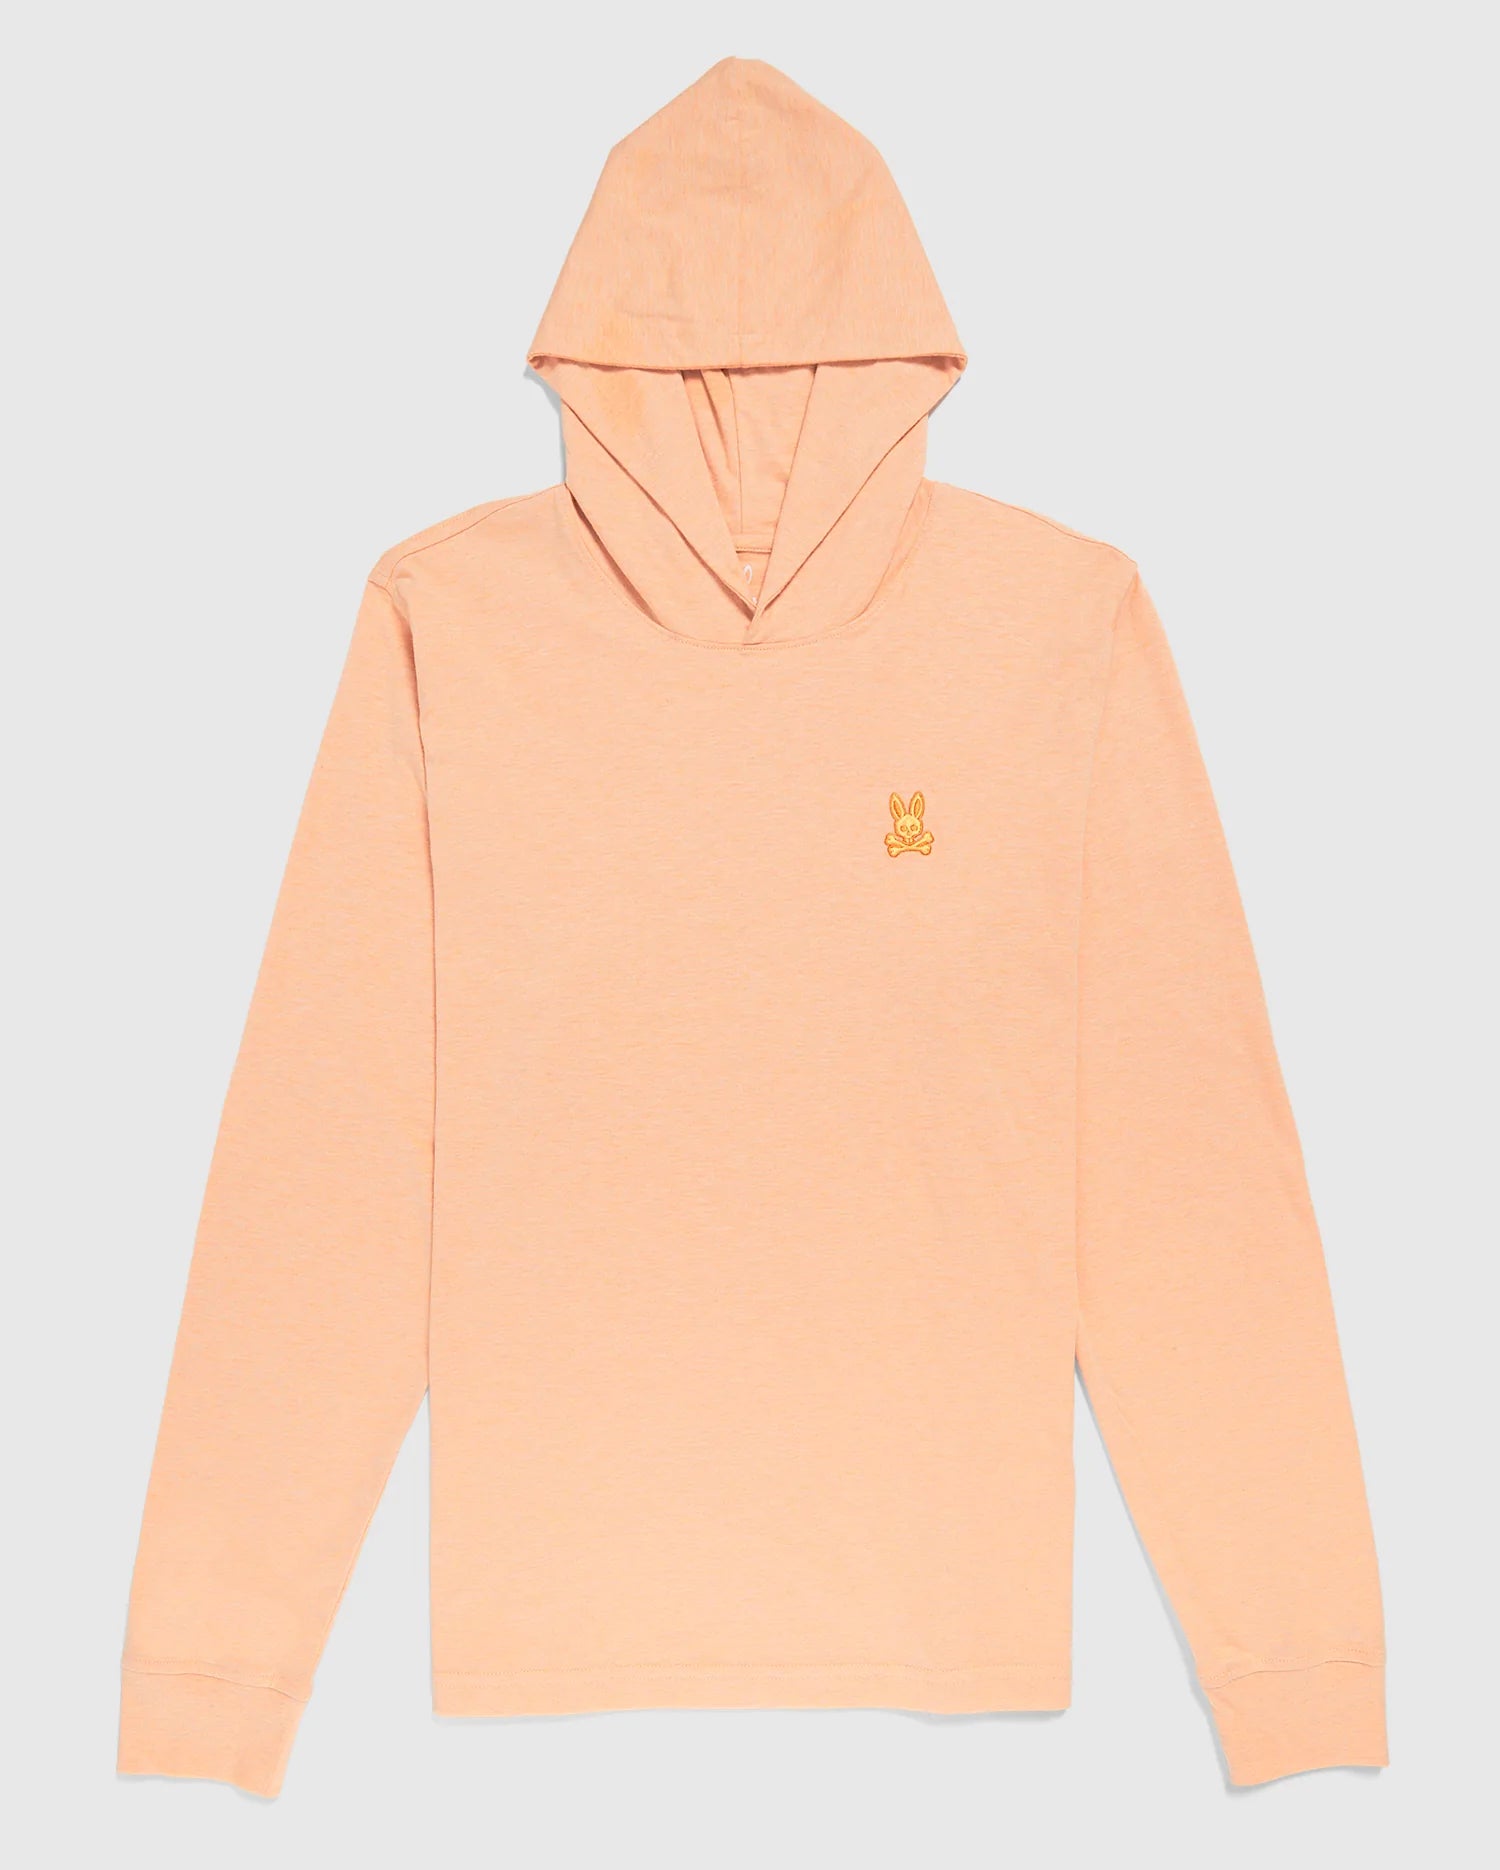 Psycho bunny timmis pullover hoodie Heather sunset sky